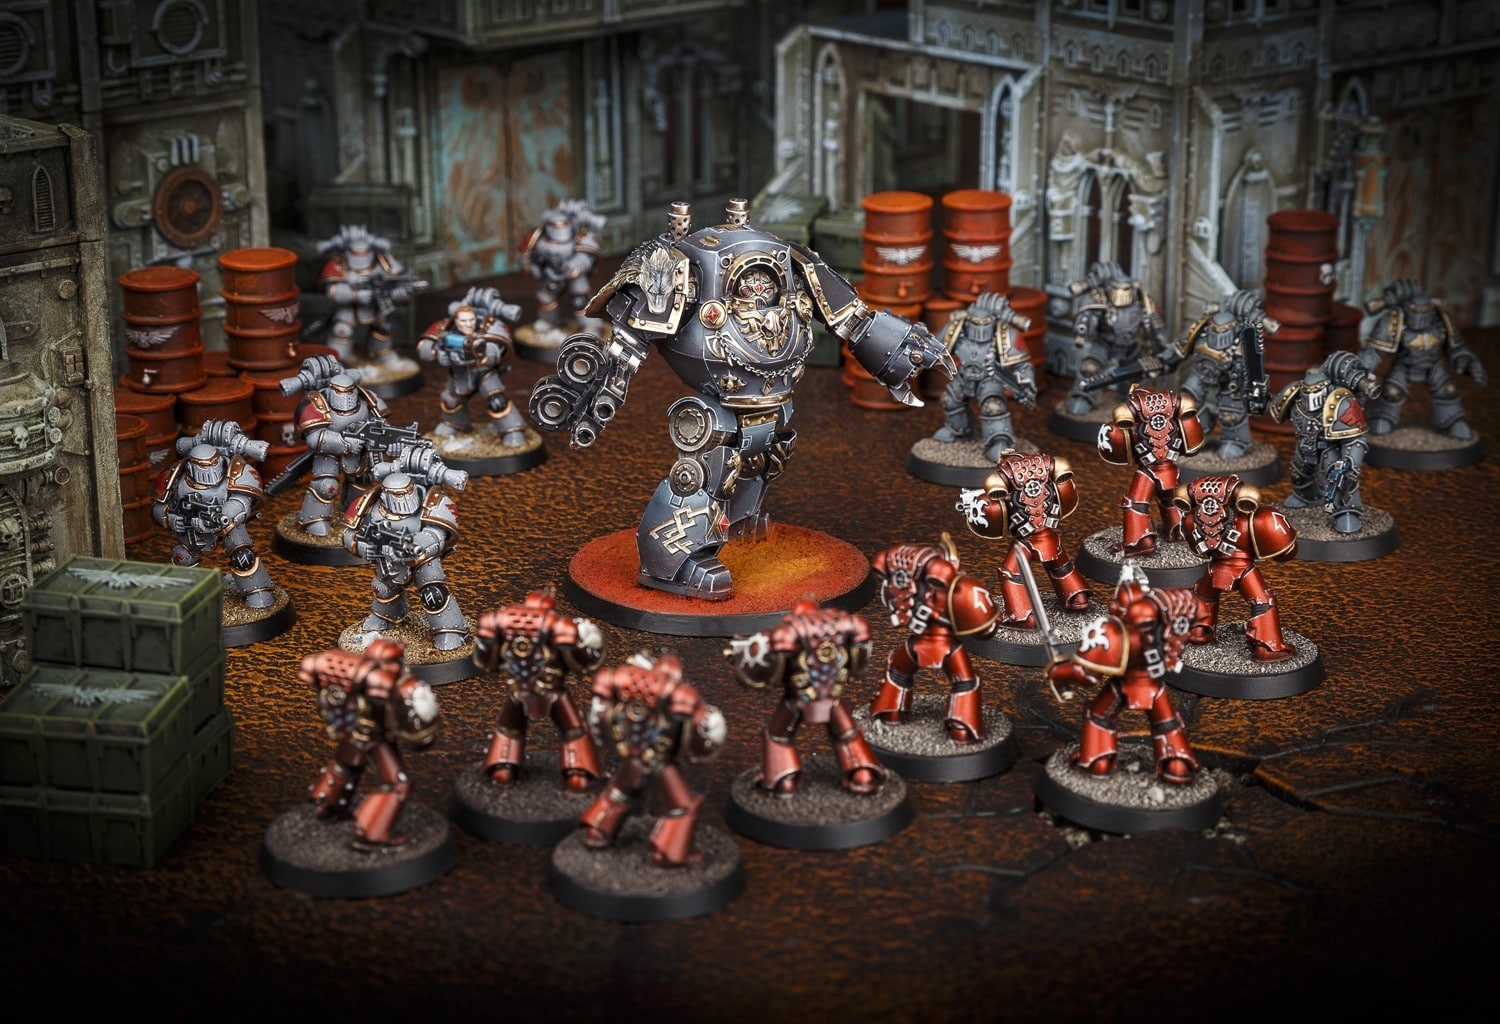 (Warhammer 40k is first and foremost a tabletop game: Space Marines of the Space Wolves fight on the side of the Empire against Space Marines of the Thousand Sons allied with Chaos.)